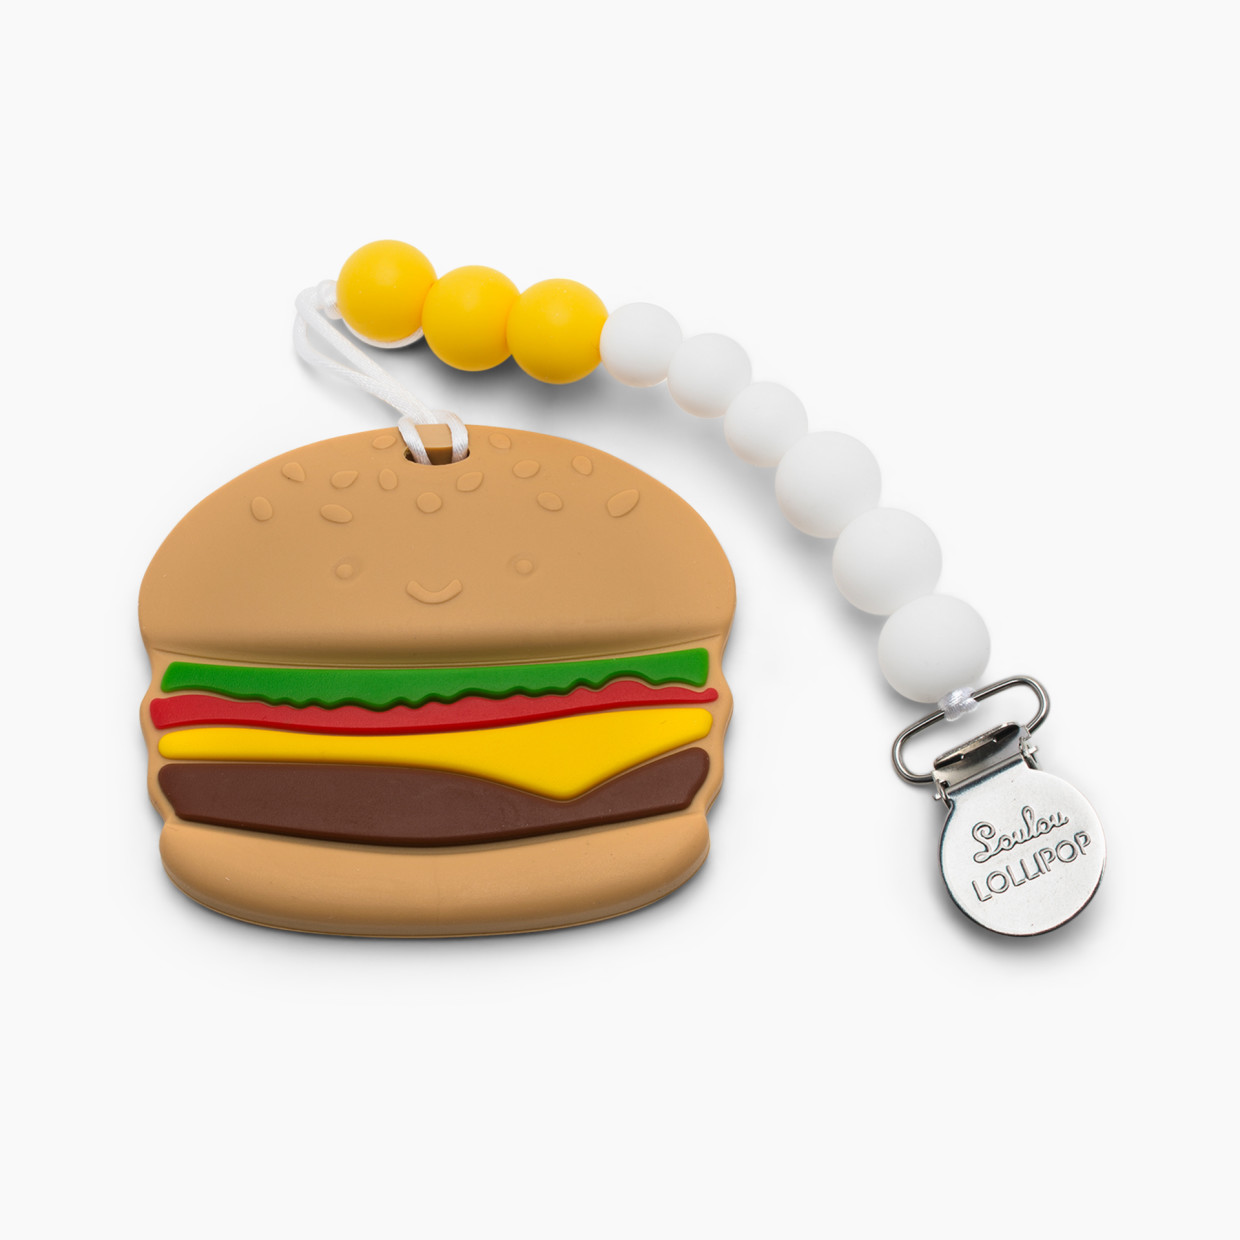 Loulou Lollipop Silicone Teether with Metal Clip - Burger (White/Yellow).